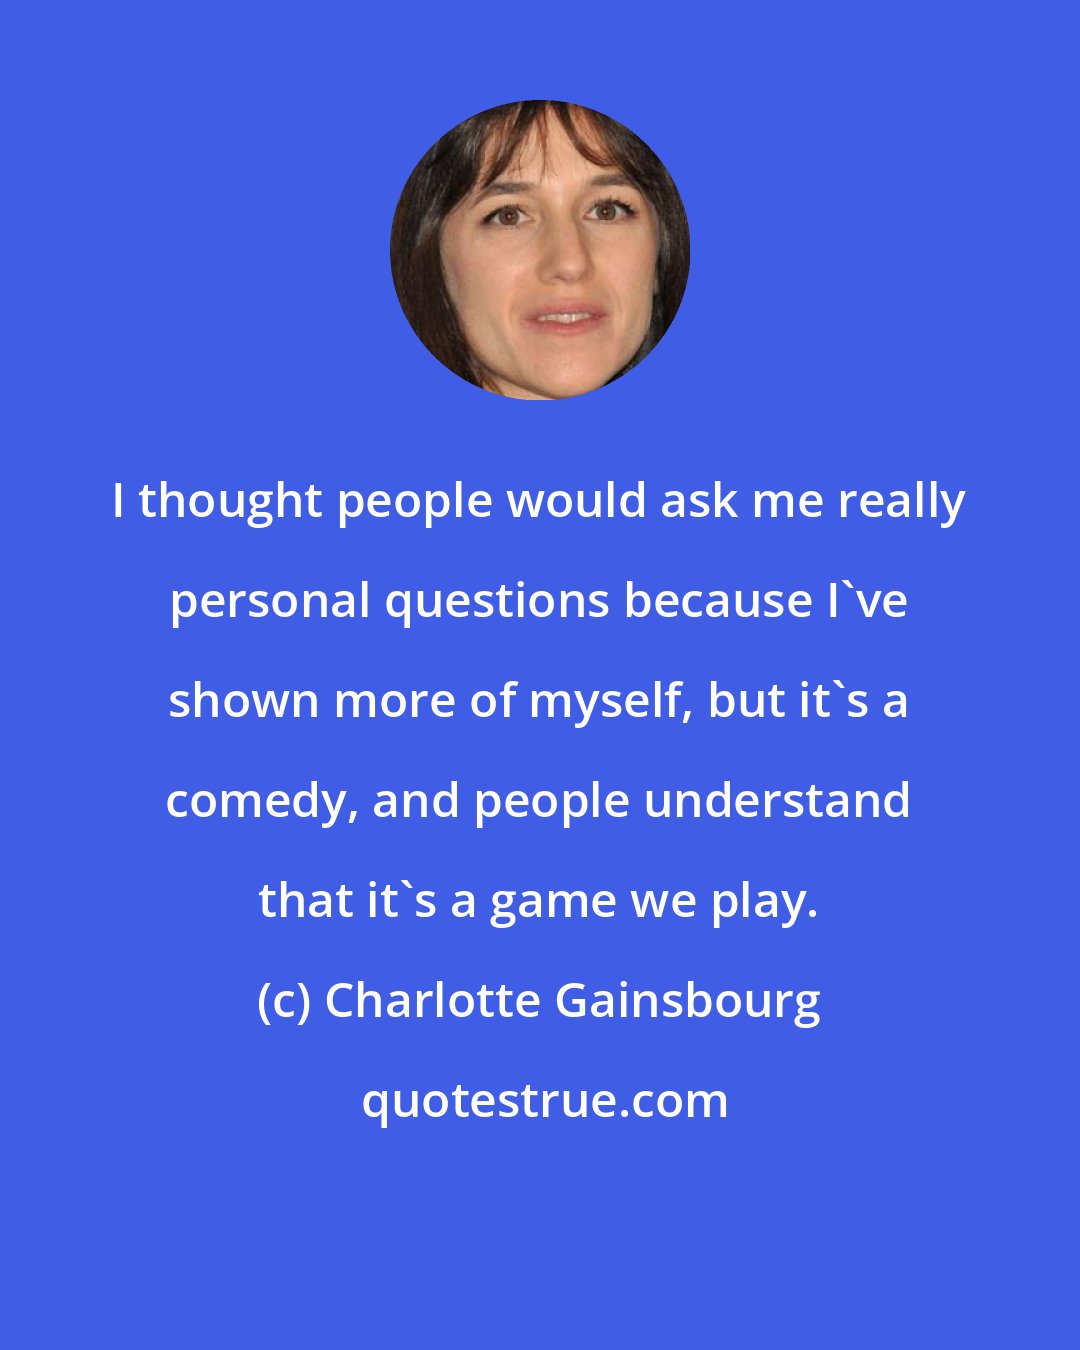 Charlotte Gainsbourg: I thought people would ask me really personal questions because I've shown more of myself, but it's a comedy, and people understand that it's a game we play.